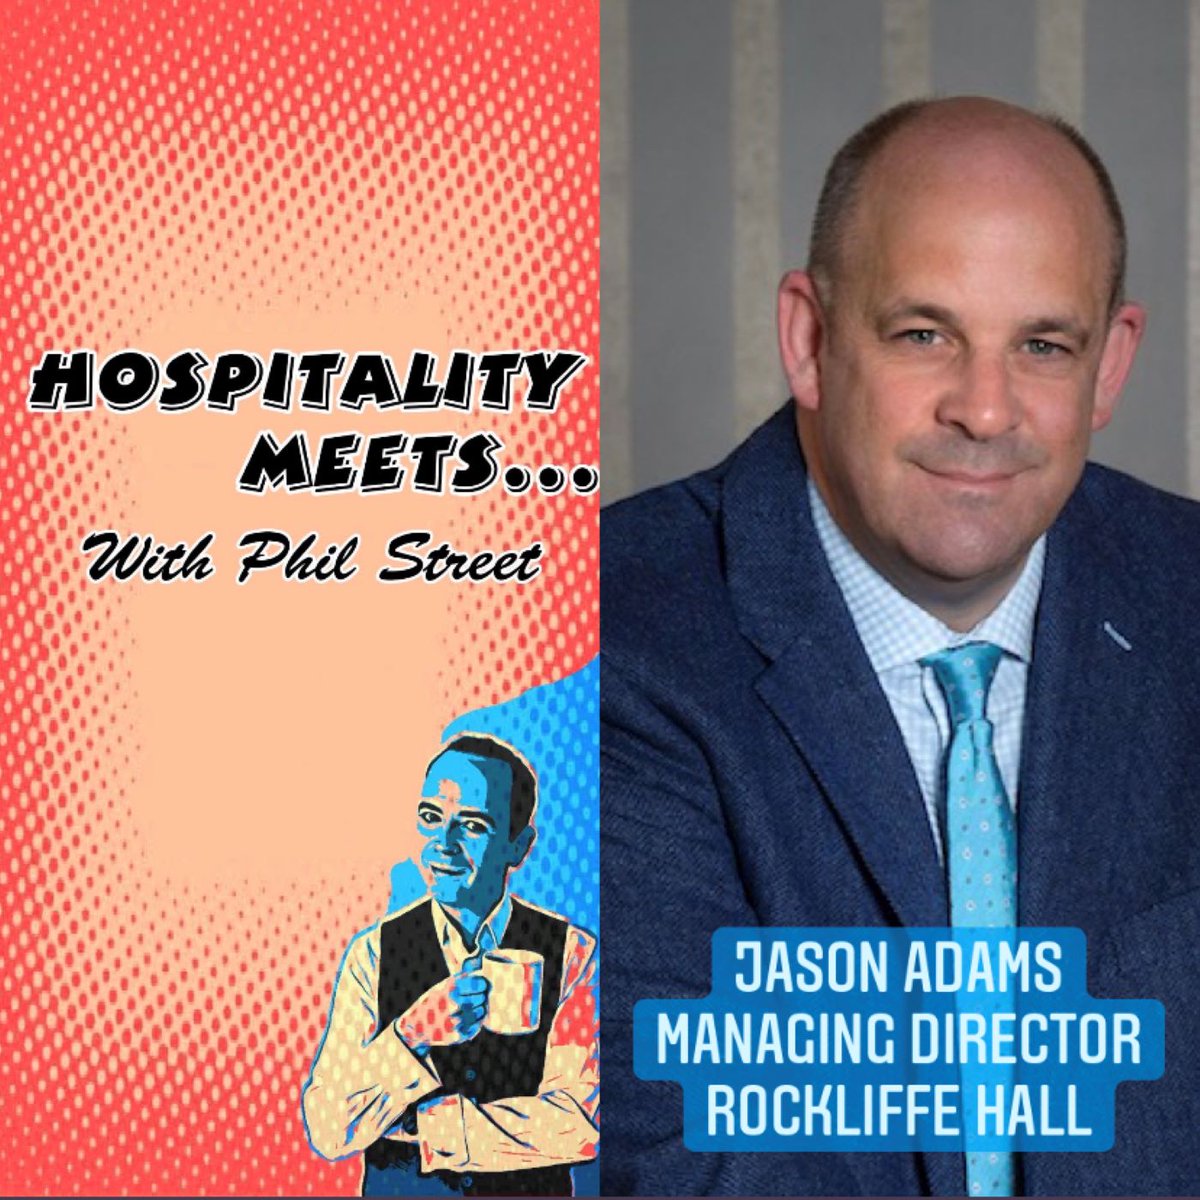 🎙️Ep107 is live 🥳🎉 I chat to @MDRockliffeHall of @RockliffeHall Jason has built a cracking career so far with brilliant lessons throughout 🎧👉linktr.ee/Hospmeetspod #resorts #luxuryhotels #leadership #careers #hospitality #hotels #community #hospitalitystories #improvement